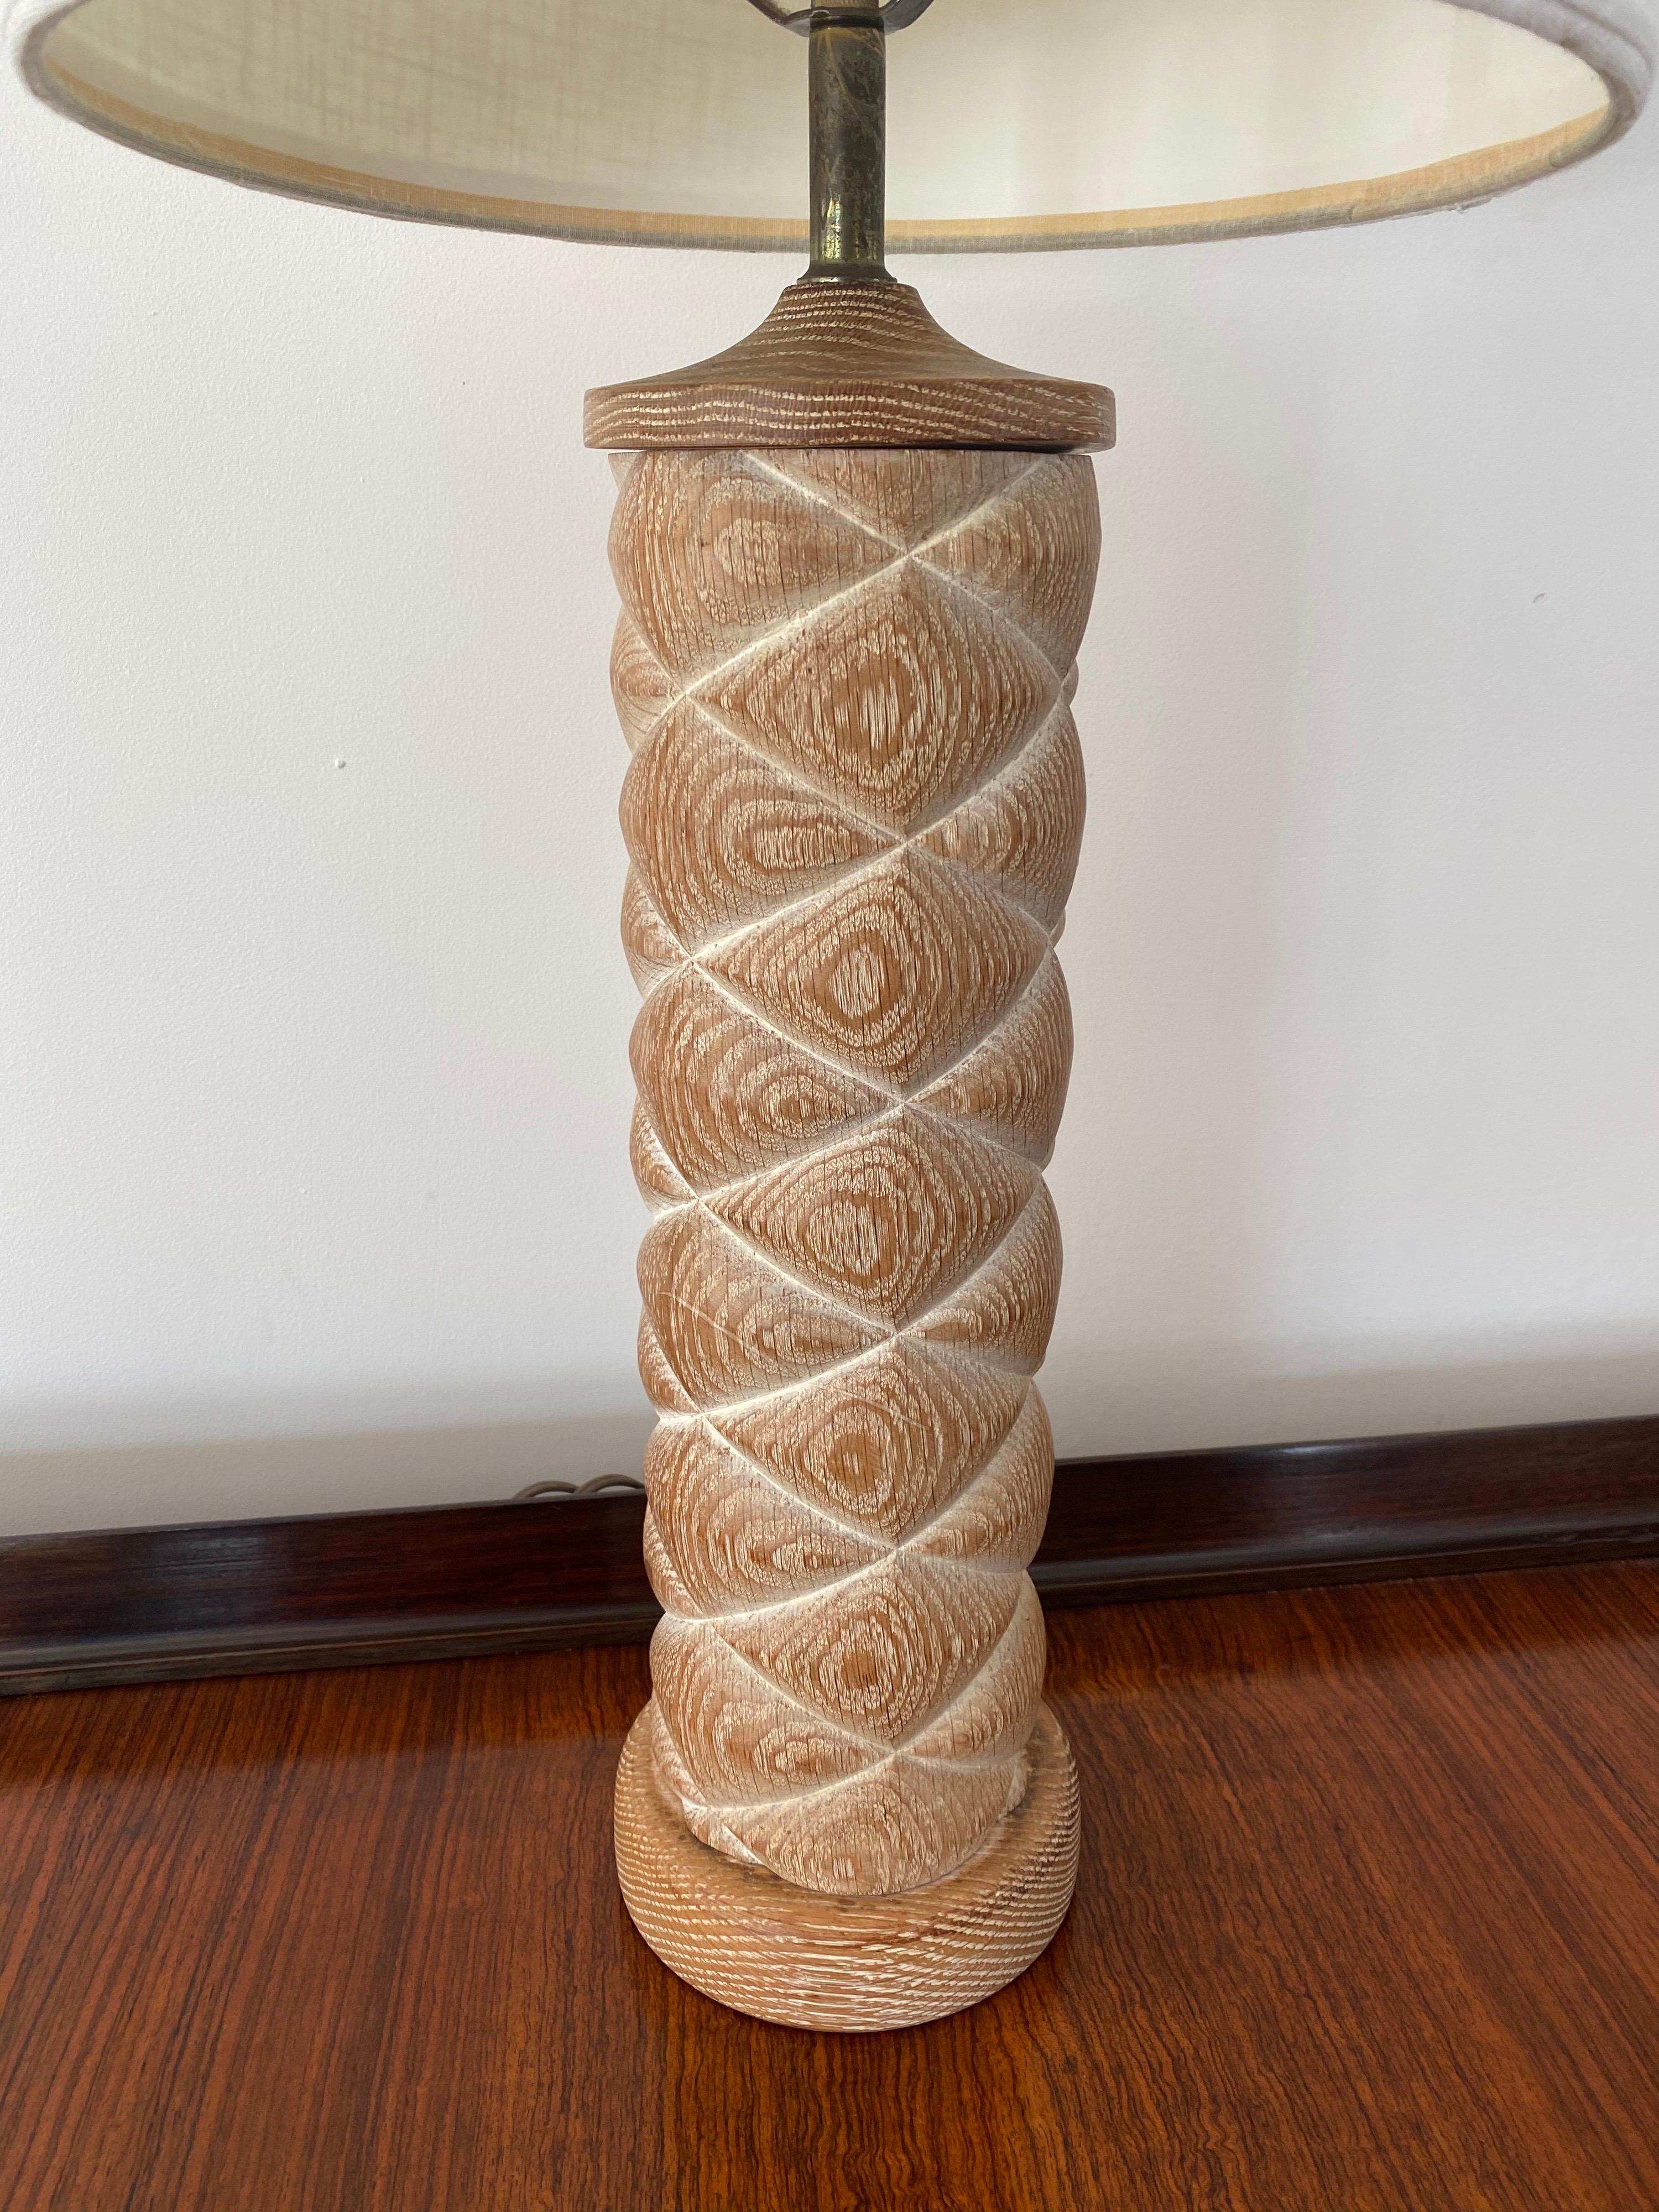 A French cylindrical cerused oak table lamp. Includes coordinating harp and finial.

Shade for display only. Lamp measures 32.5